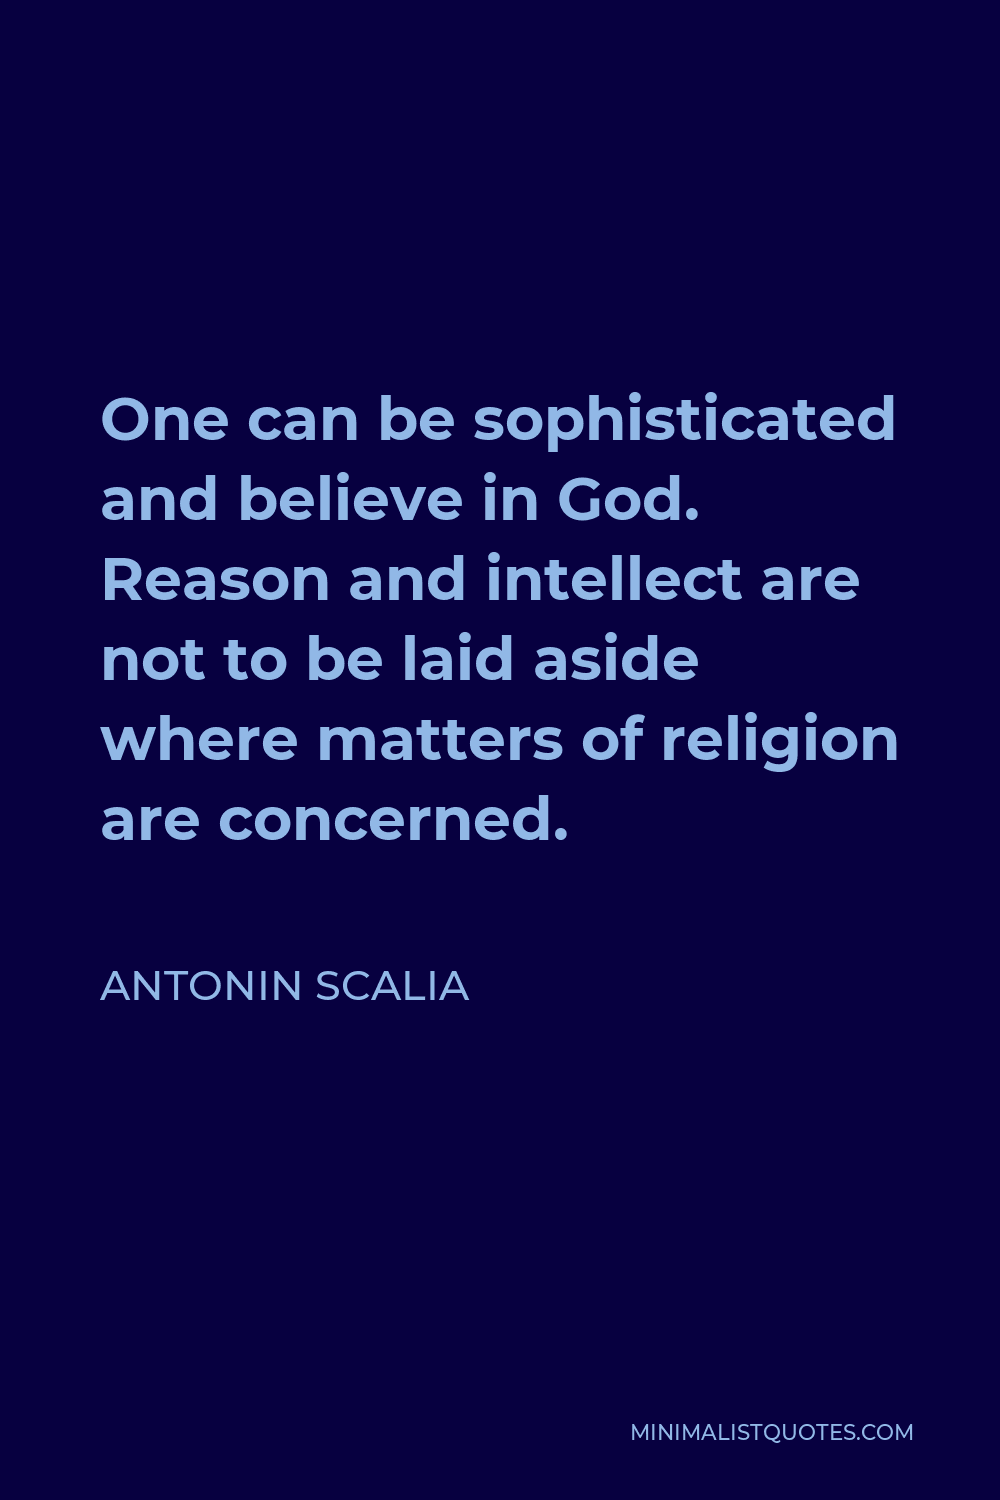 Antonin Scalia Quote - One can be sophisticated and believe in God. Reason and intellect are not to be laid aside where matters of religion are concerned.